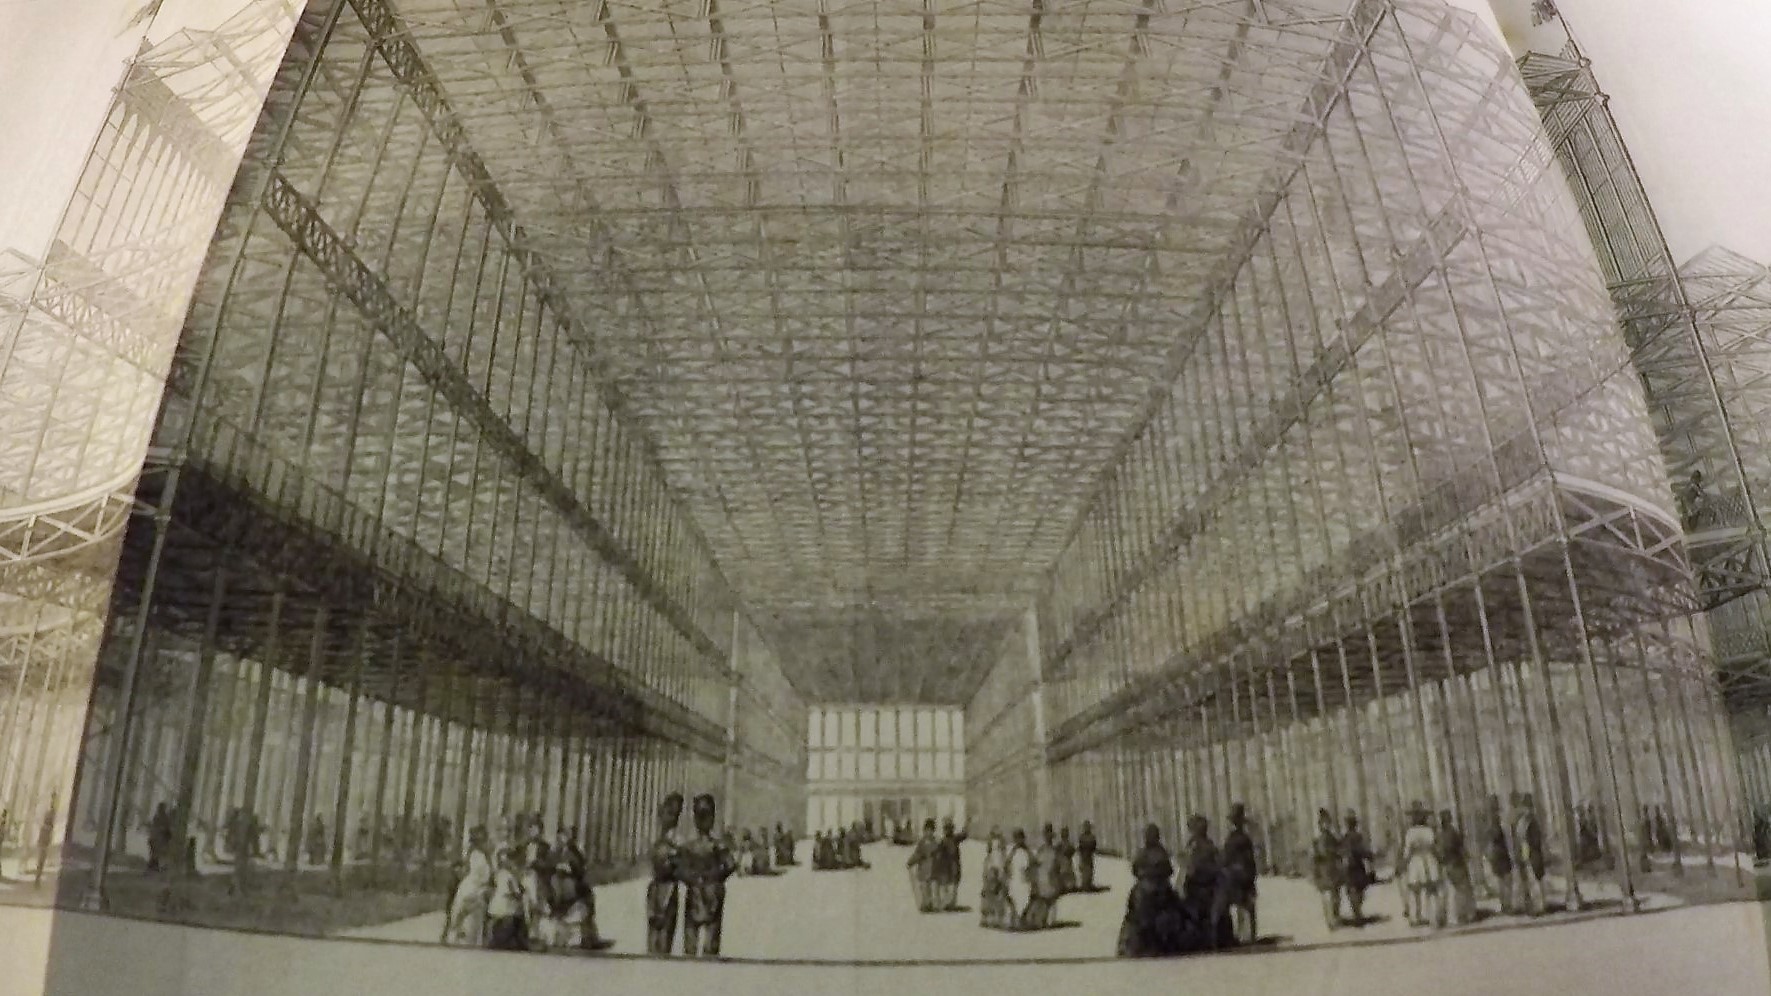 Illustration of the Crystal Palace, London, under construction